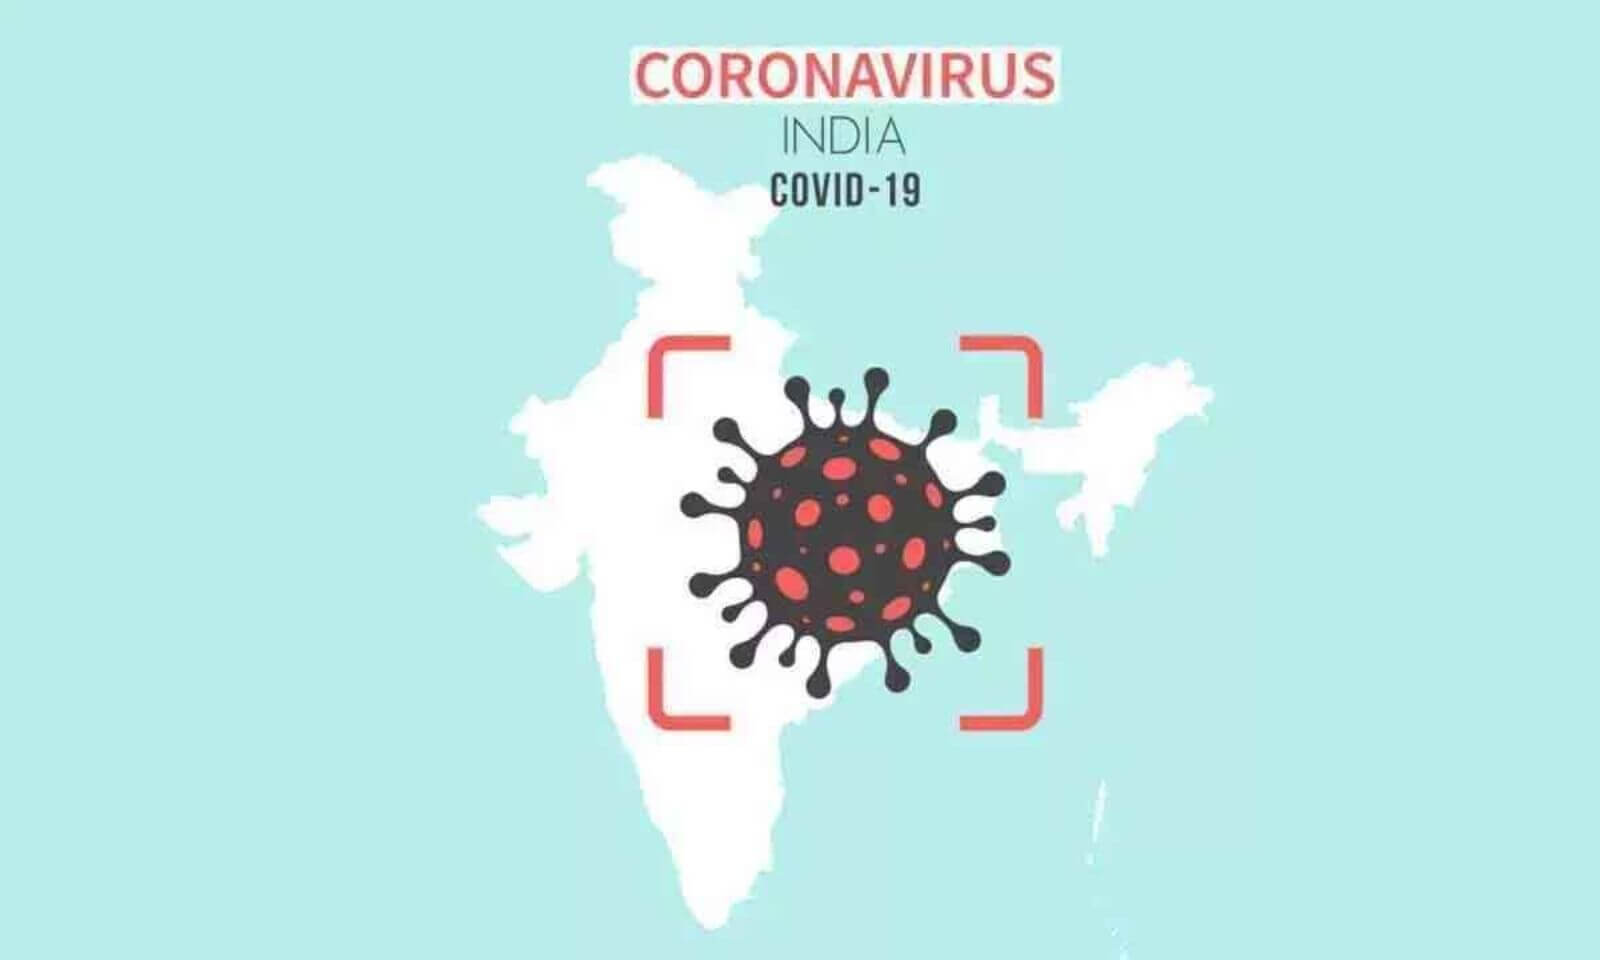 India register 16,103 new COVID-19 cases along with 31 deaths